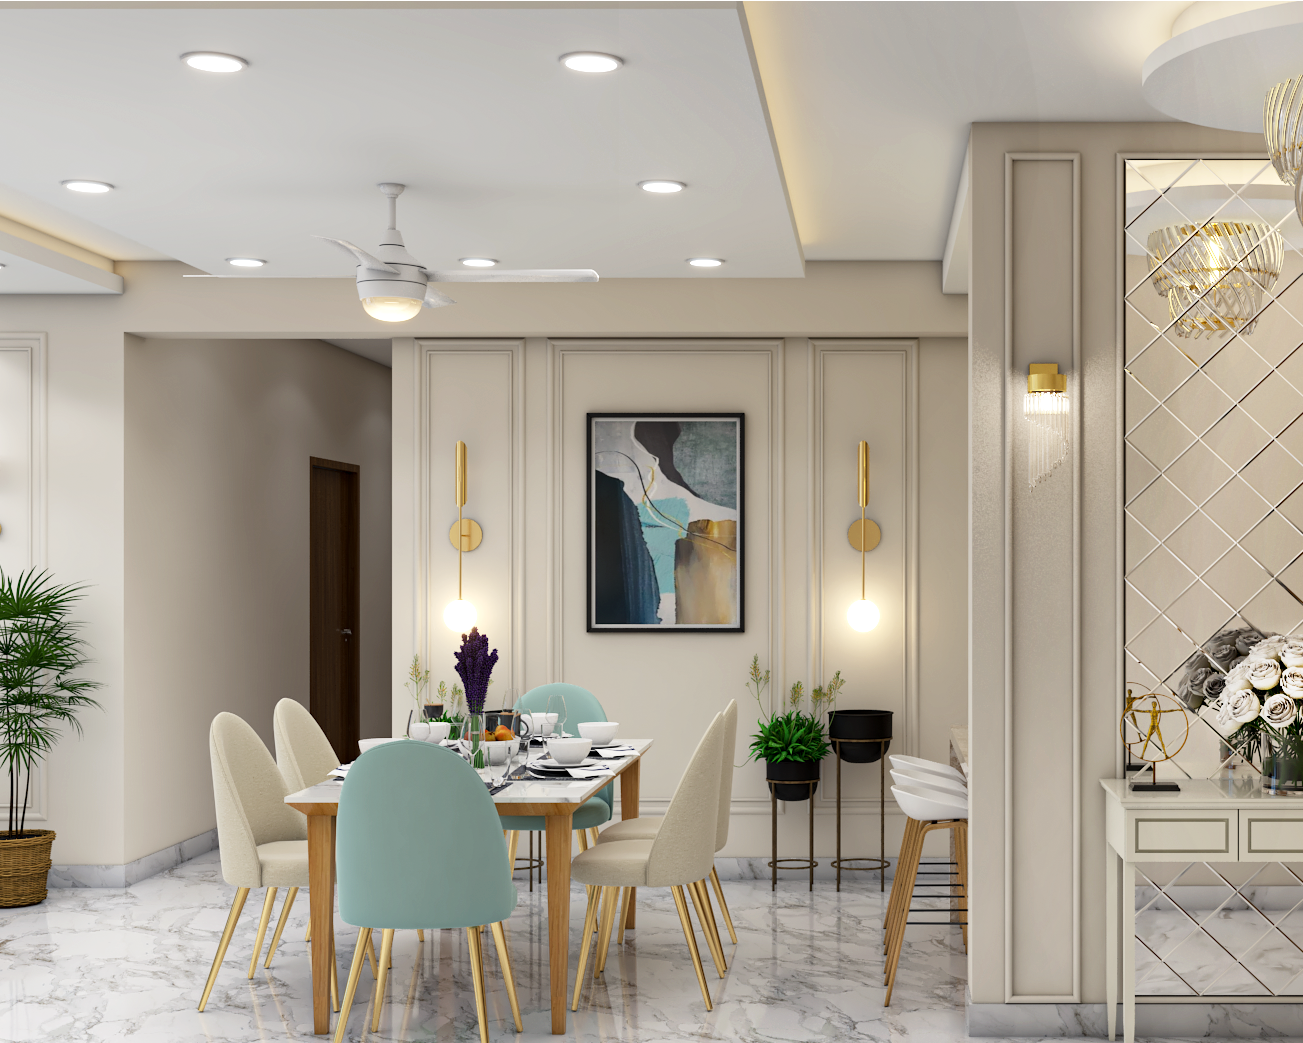 Classic Dining Room Design With Spacious Layout